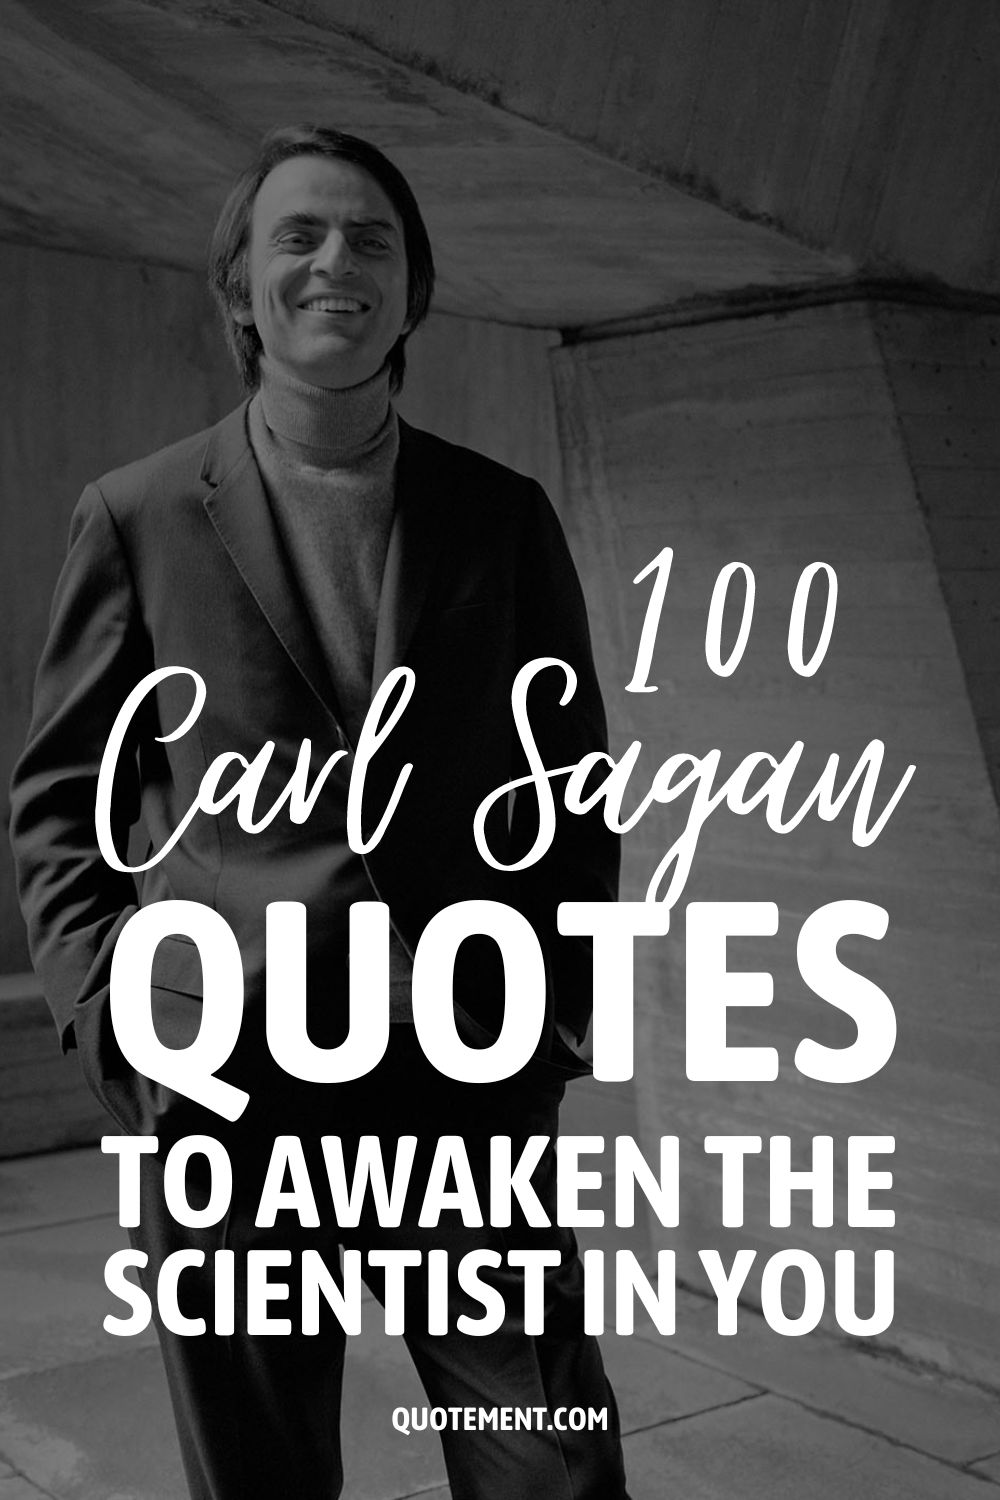 100 Carl Sagan Quotes To Awaken The Scientist In You